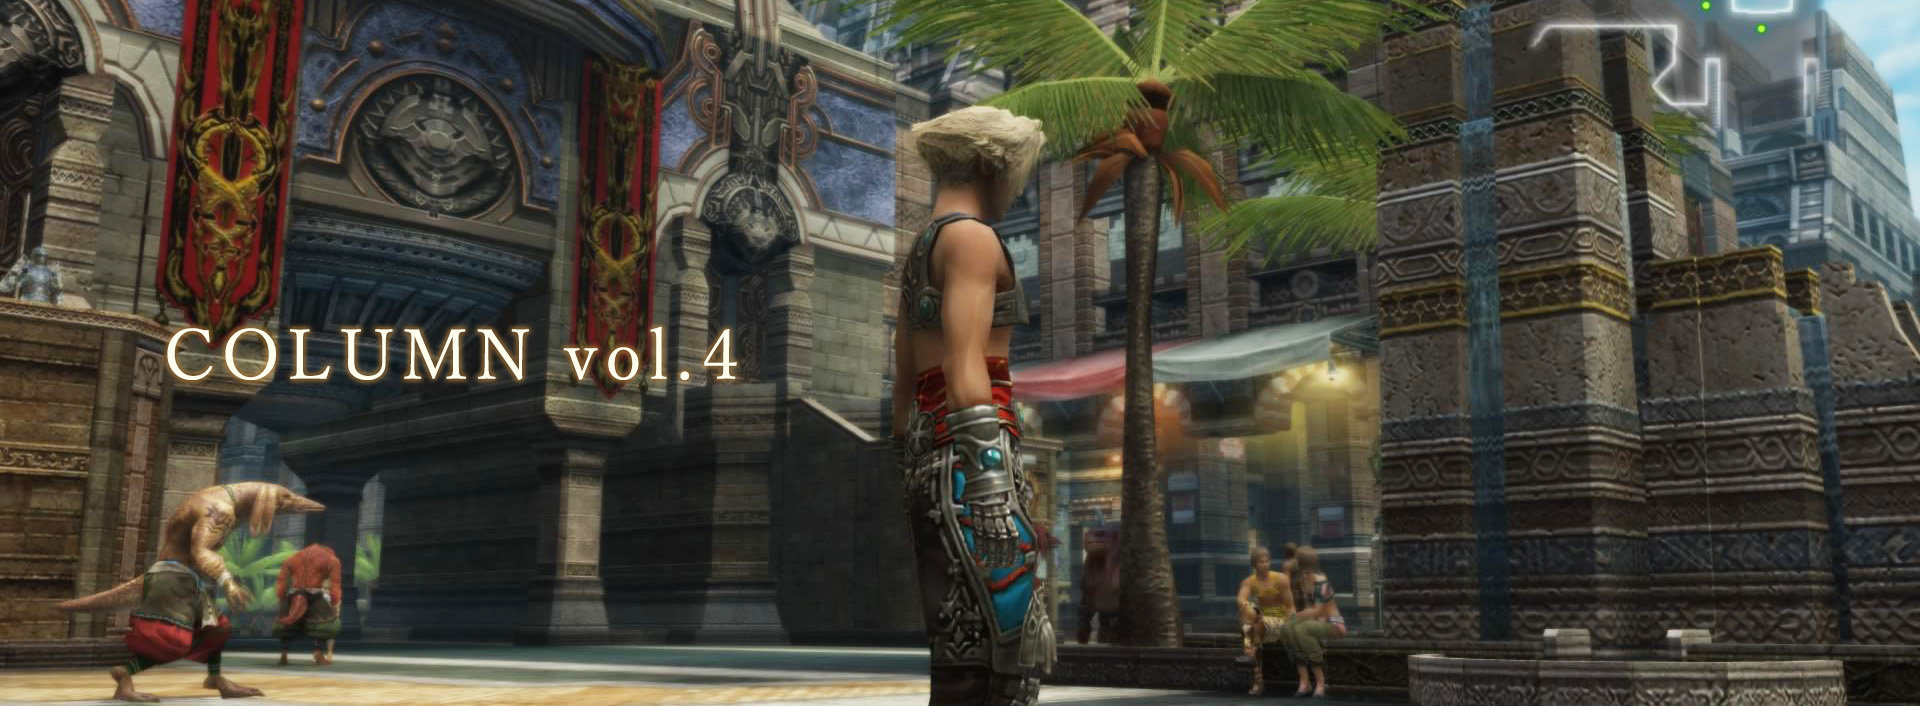 FINAL FANTASY XII THE ZODIAC AGE: A stroll through the thriving commercial center of Rabanastre